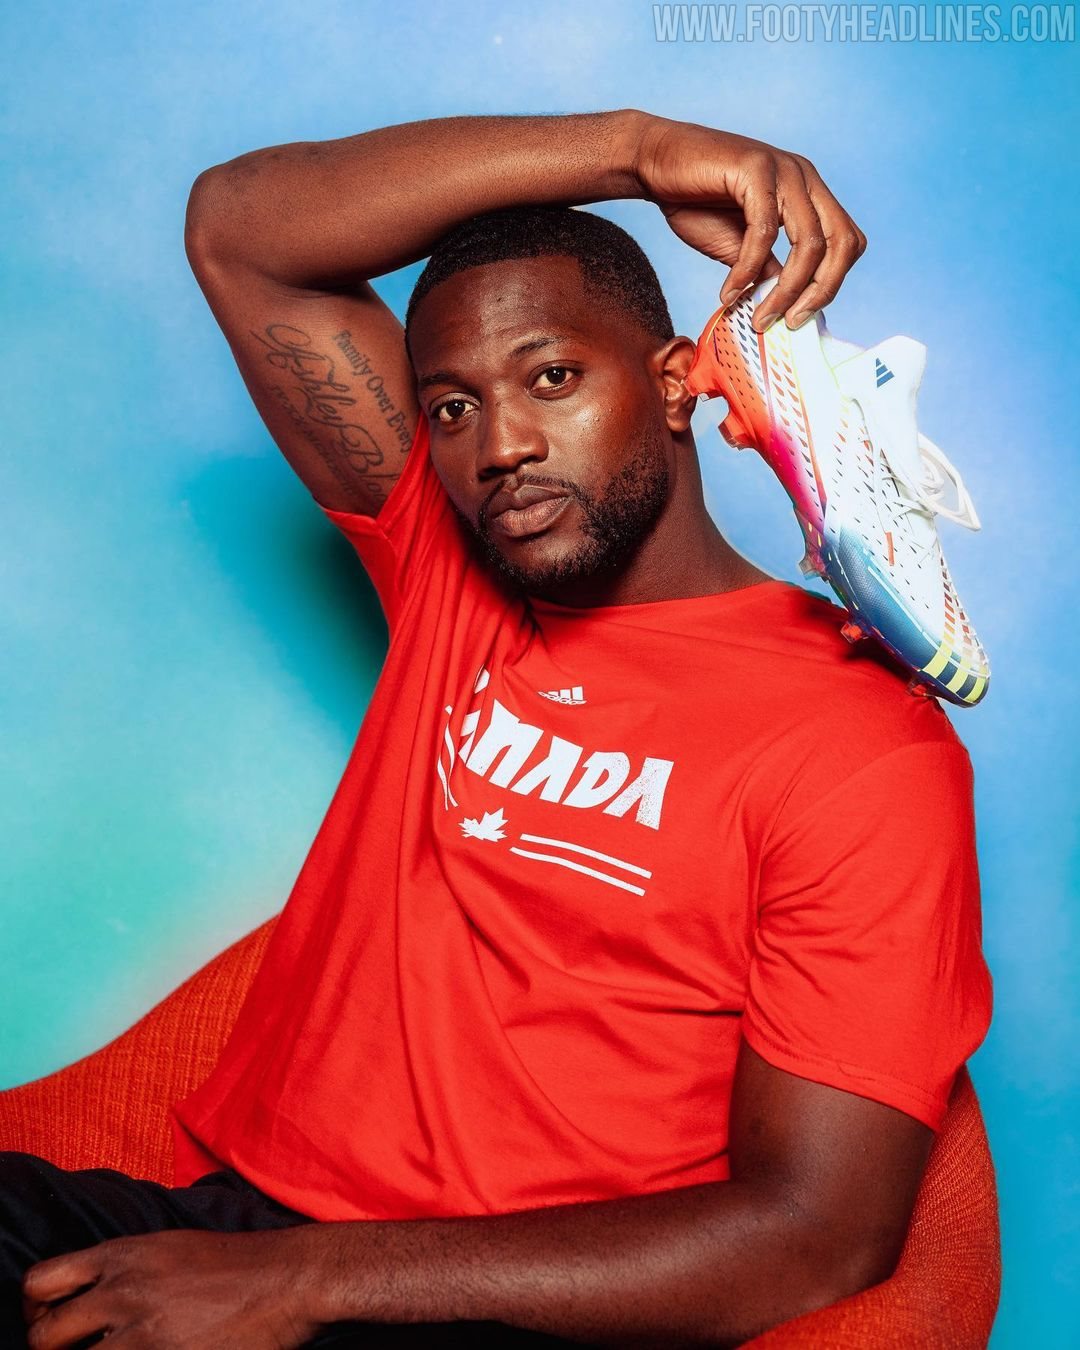 Adidas Release Canada 2022 Cup Collection - Inspired by 1986 Jerseys - Footy Headlines